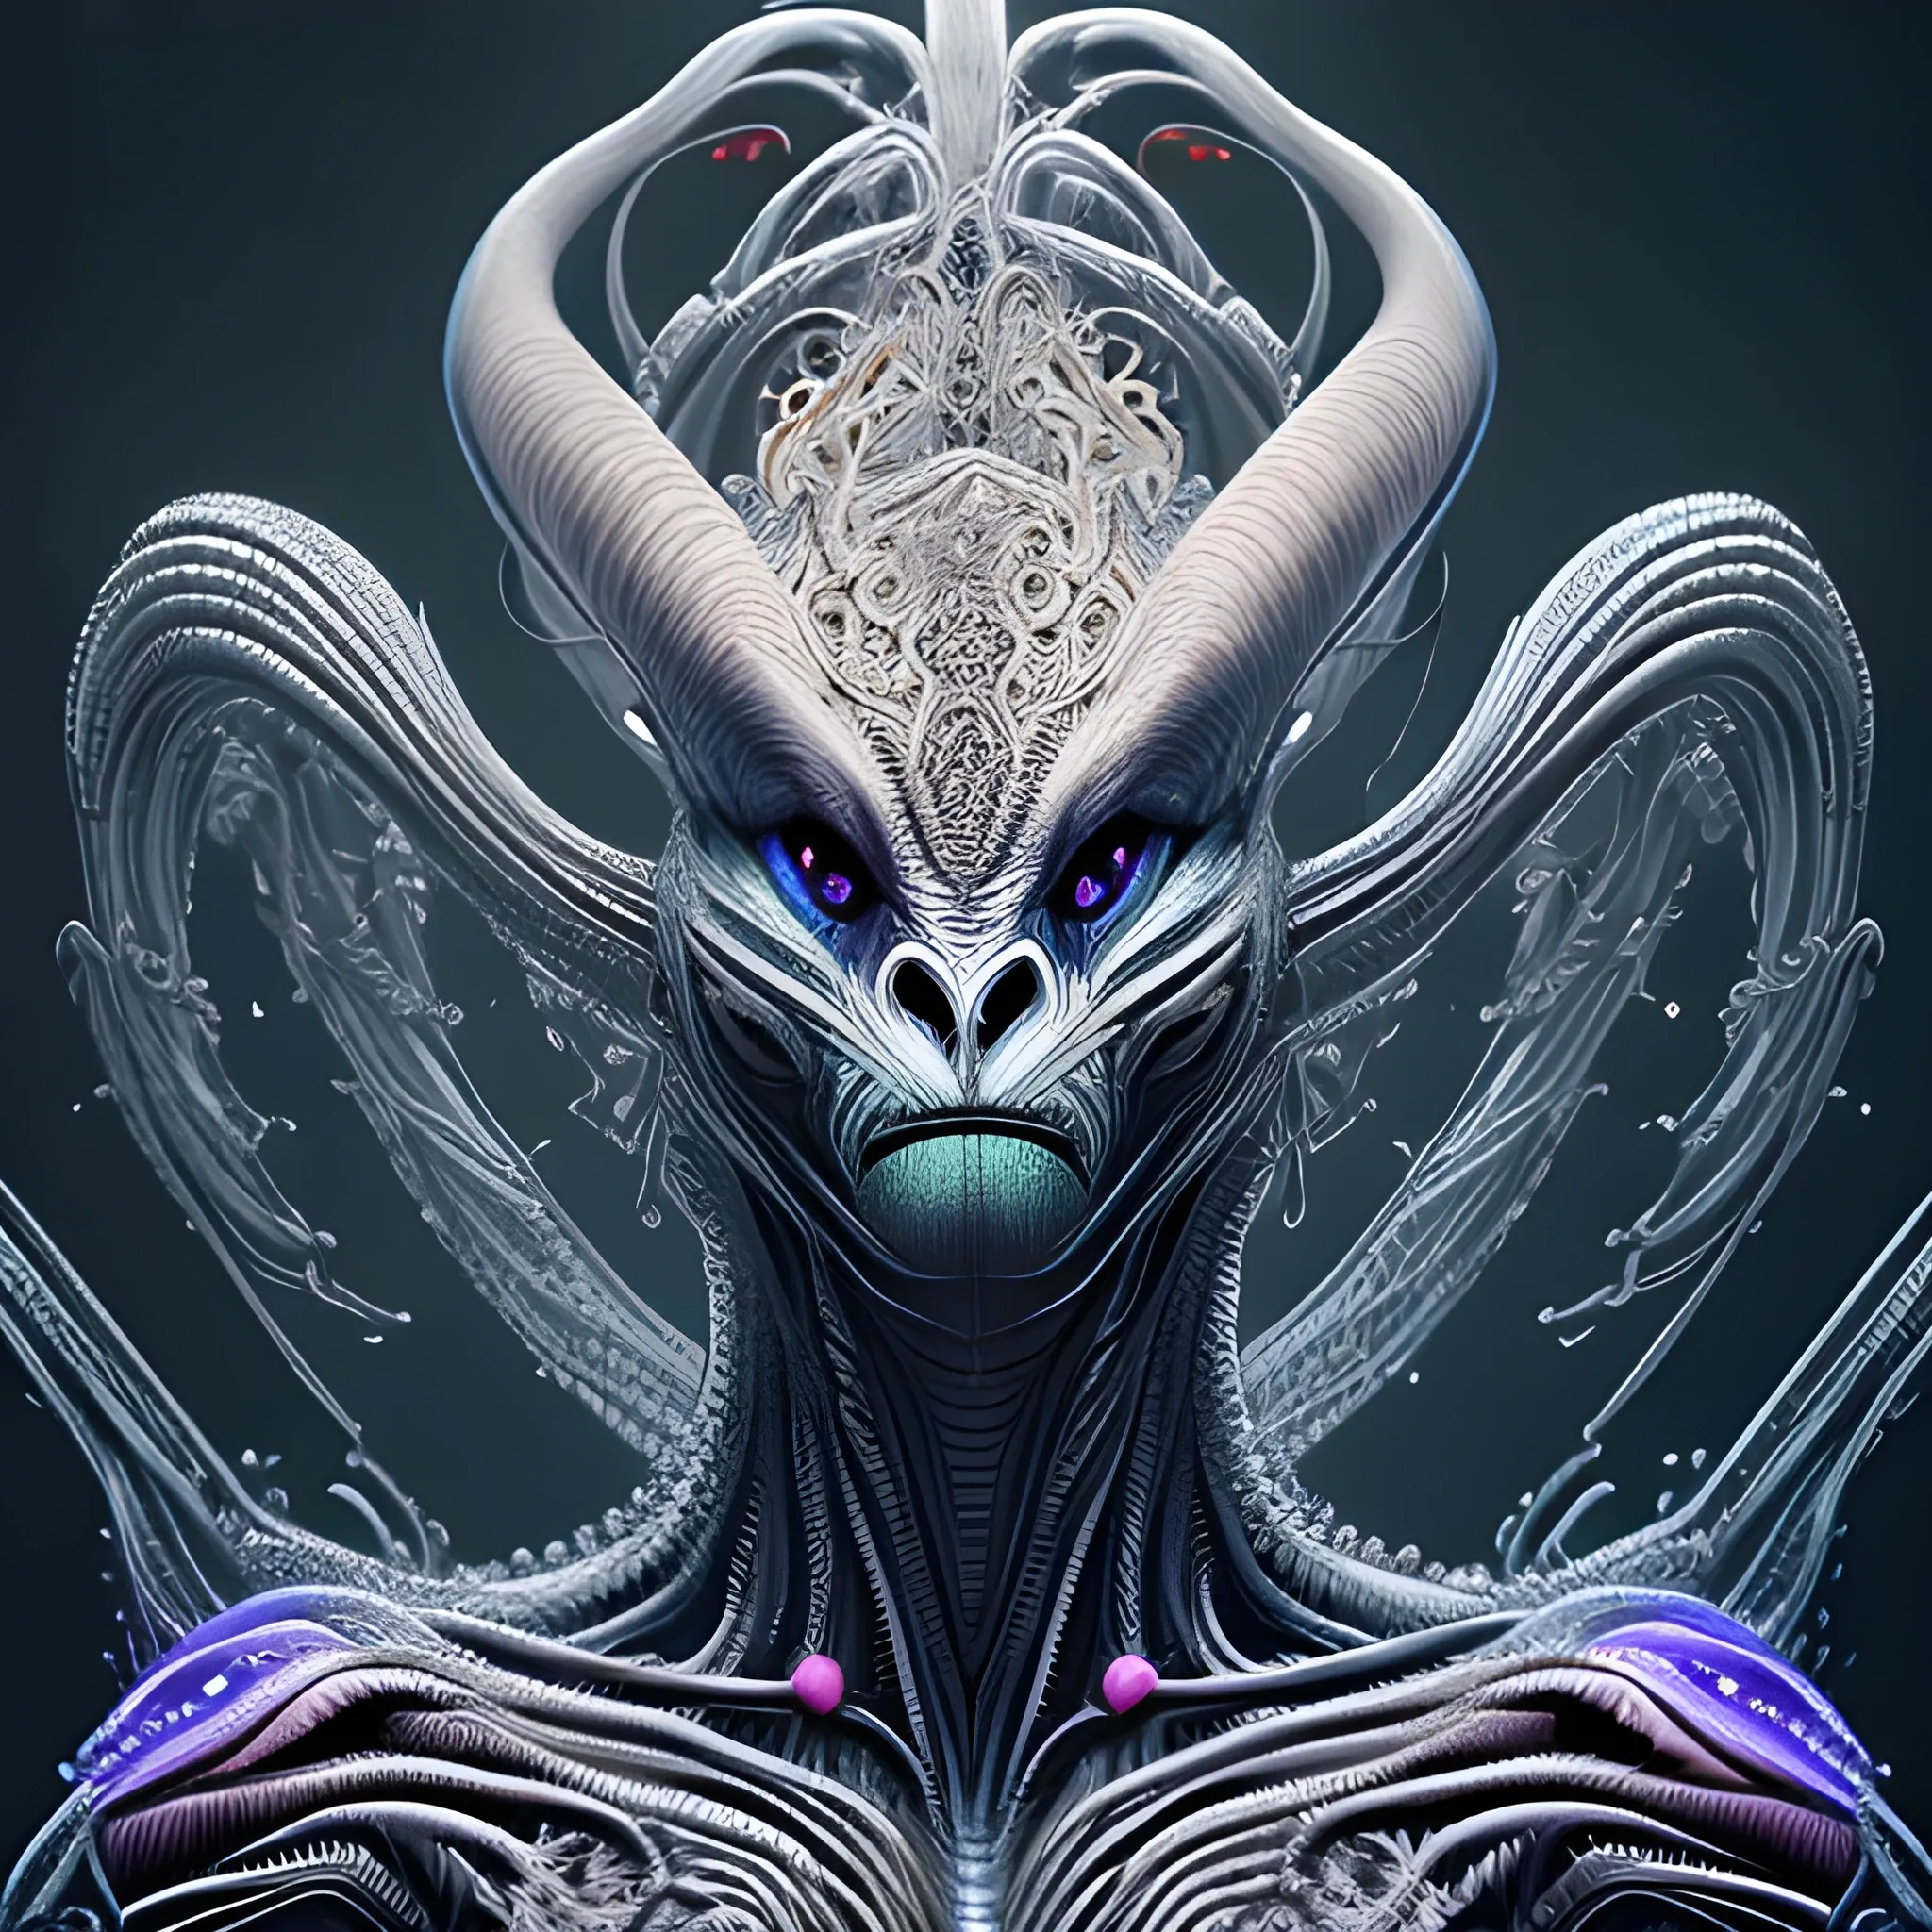 A detailed and intricate digital art piece in a cinematic style, this ultra high resolution portrait of a powerful alien beast is a true masterpiece 